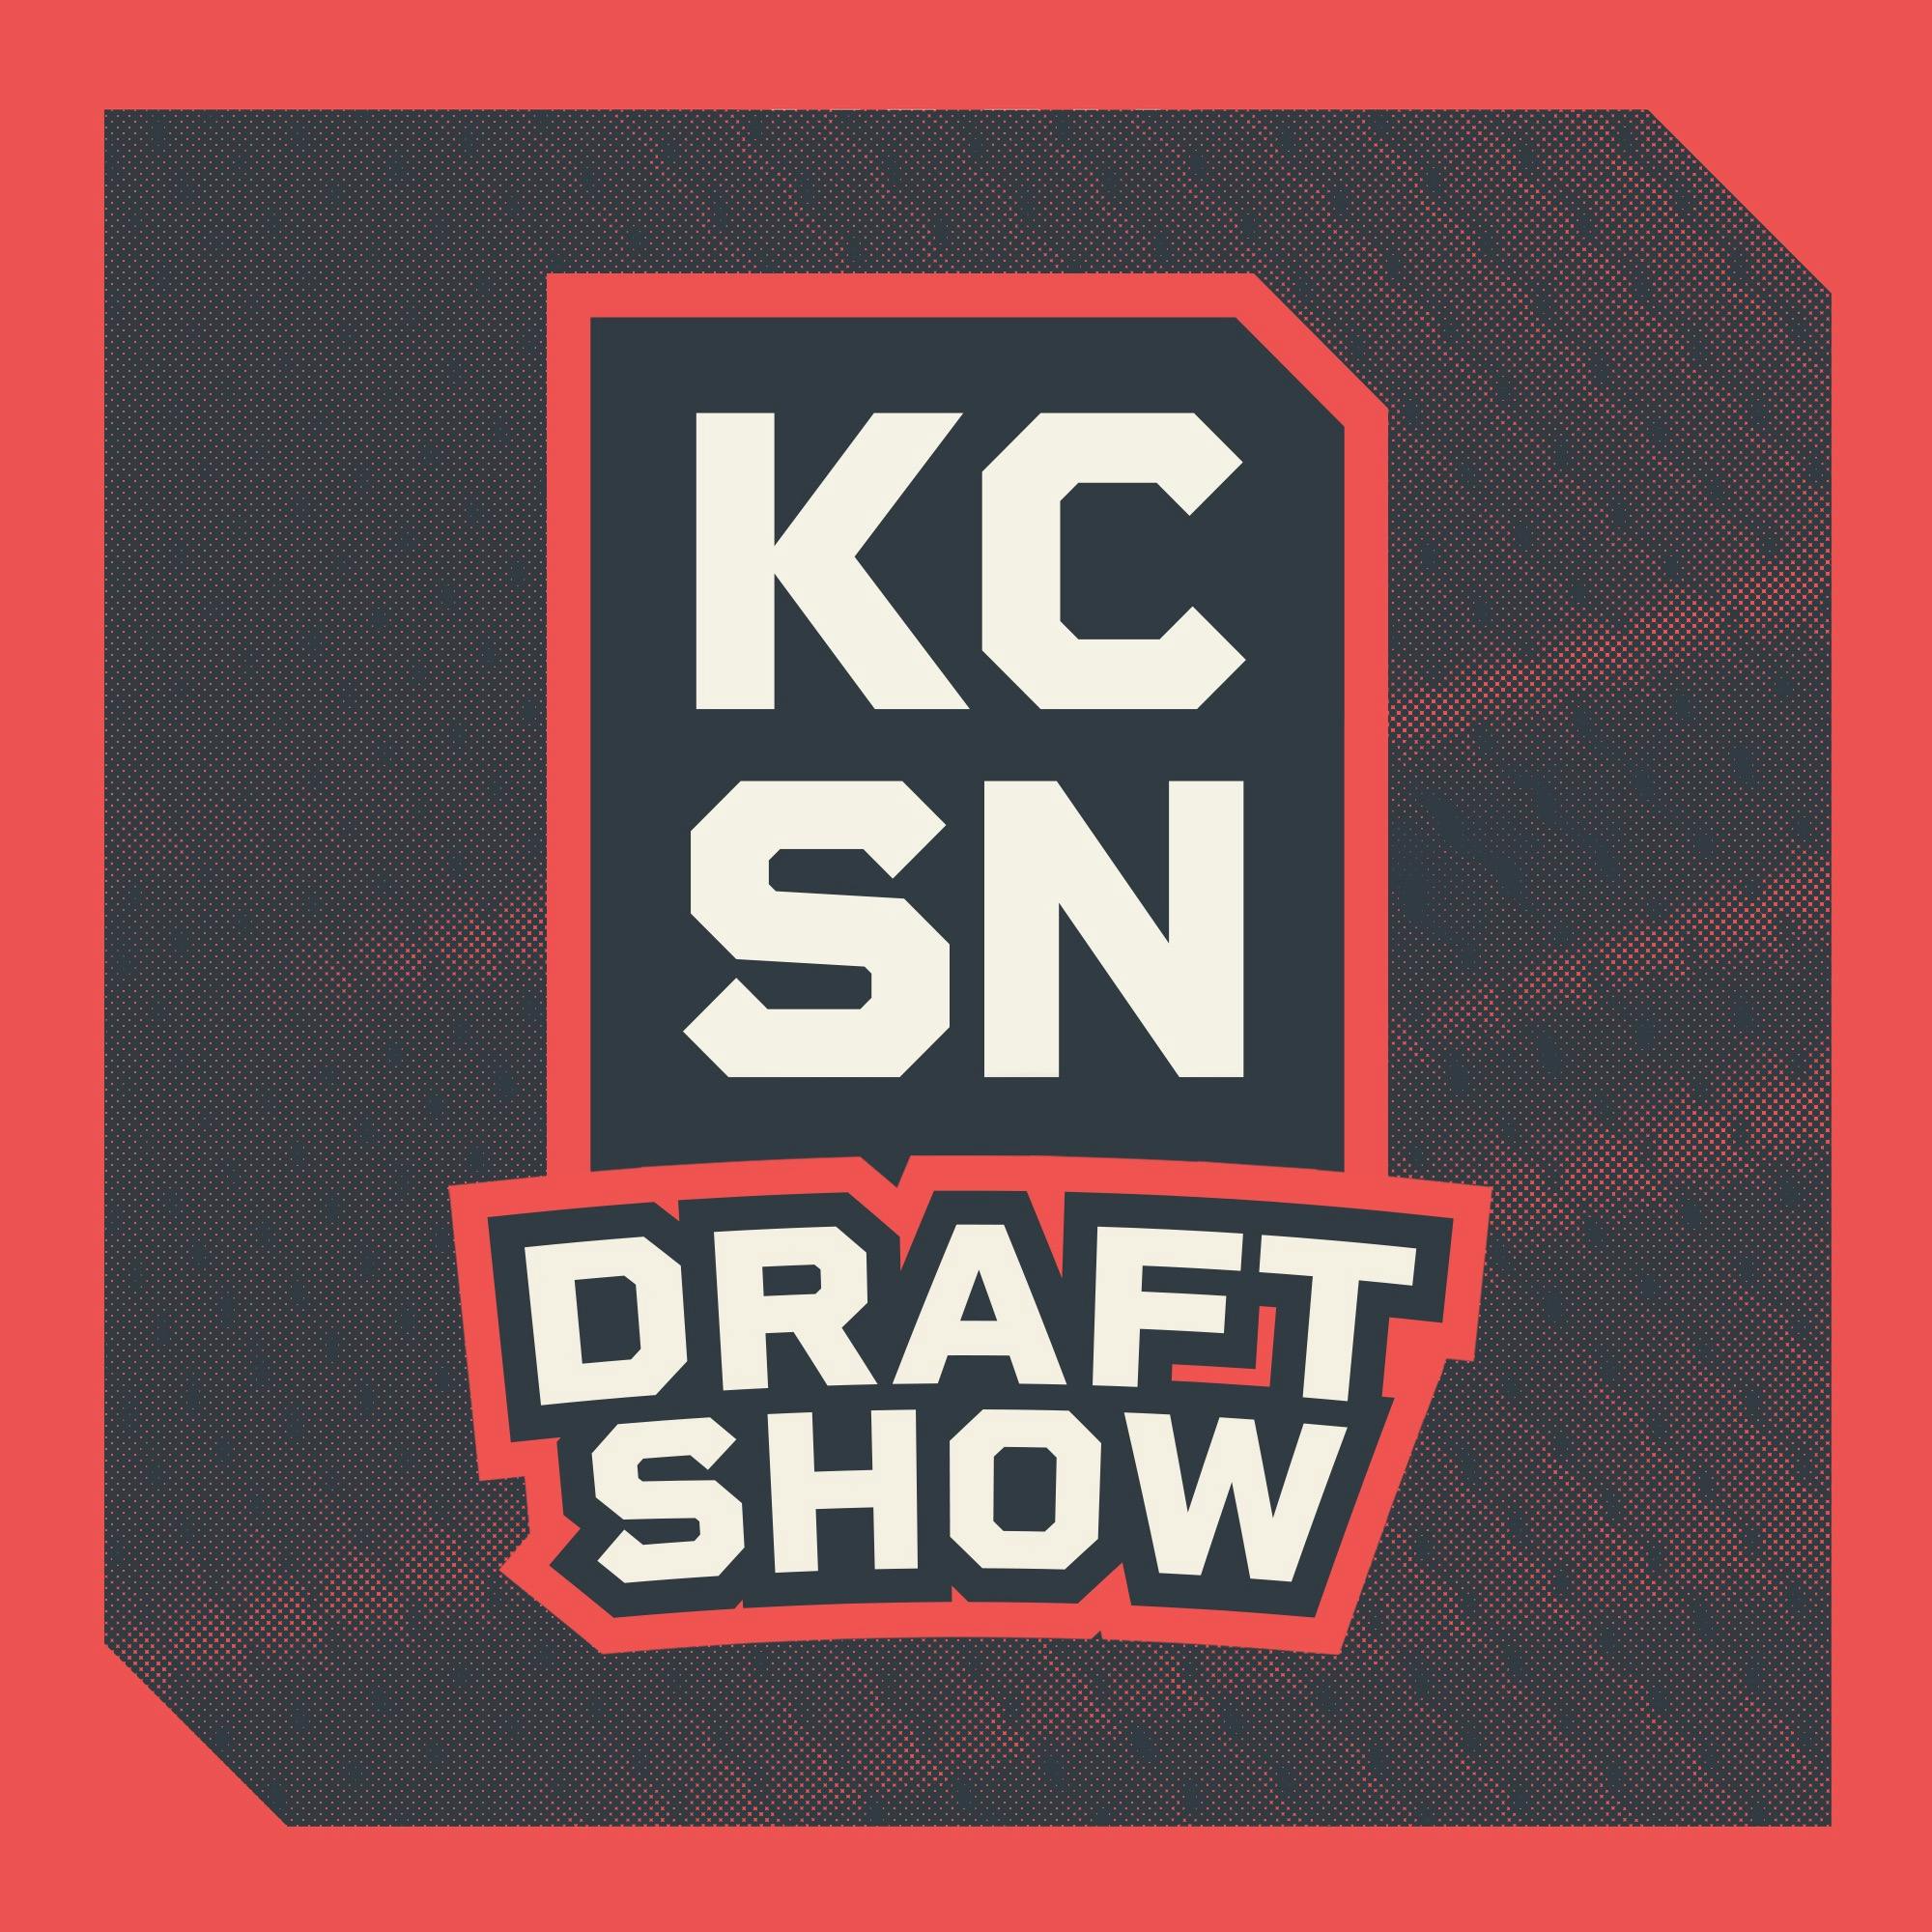 KCSN Draft Show 3/8: Kent, Matty and Eric Galko Break Down LBs in 2023 NFL Draft + Fits for Chiefs